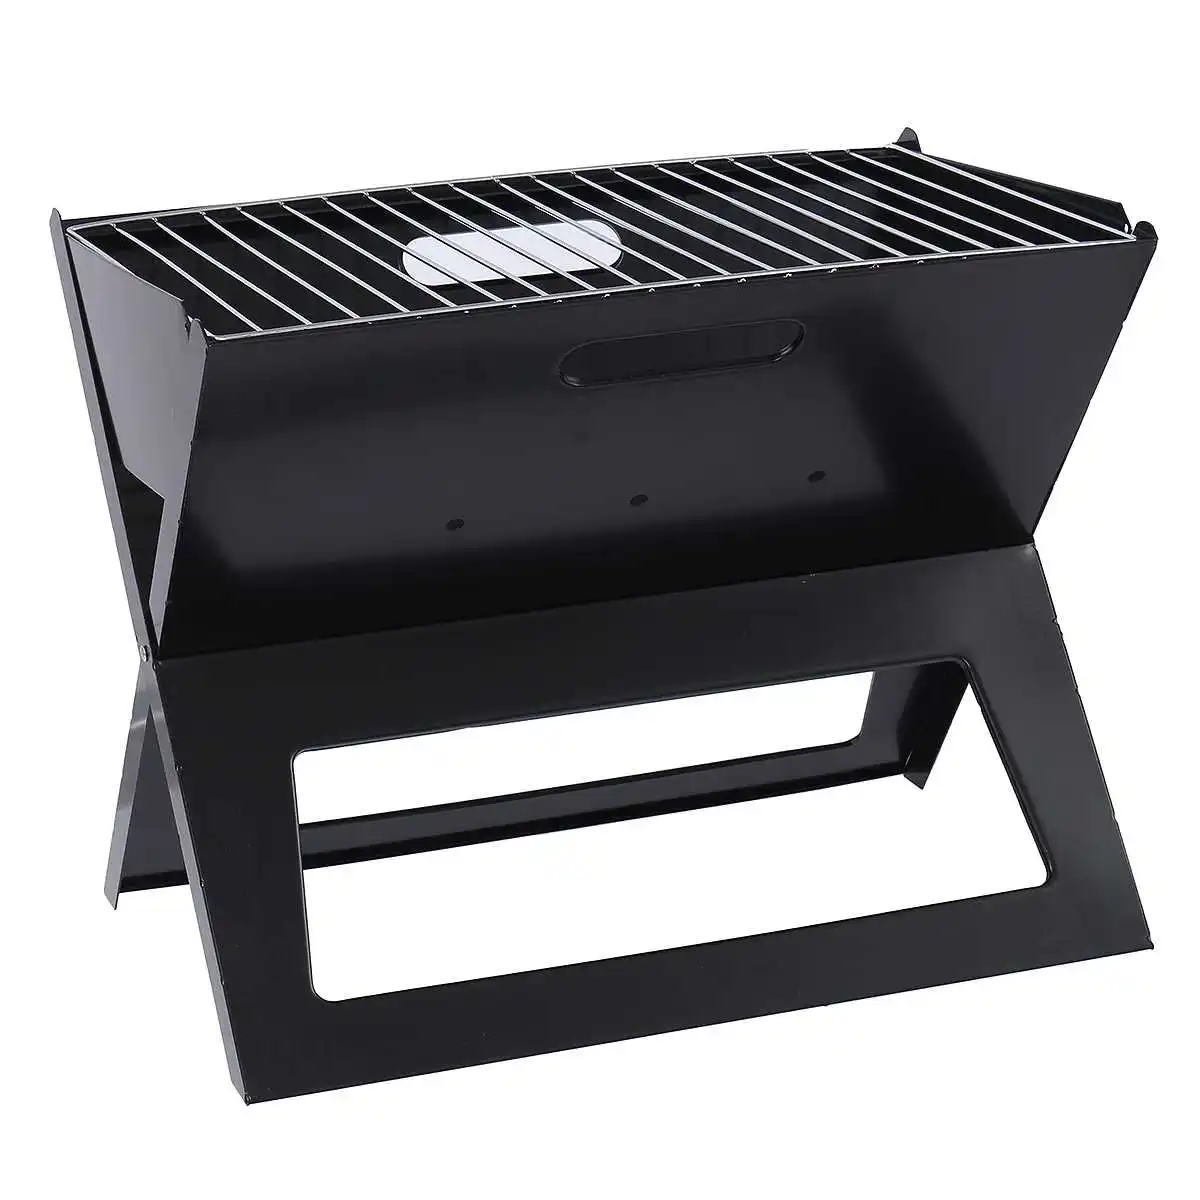 Barbecue Grill Stainless Steel Portable Folding BBQ Charcoal Starter Stove Outdoor Picnic Camping Kitchen Tool